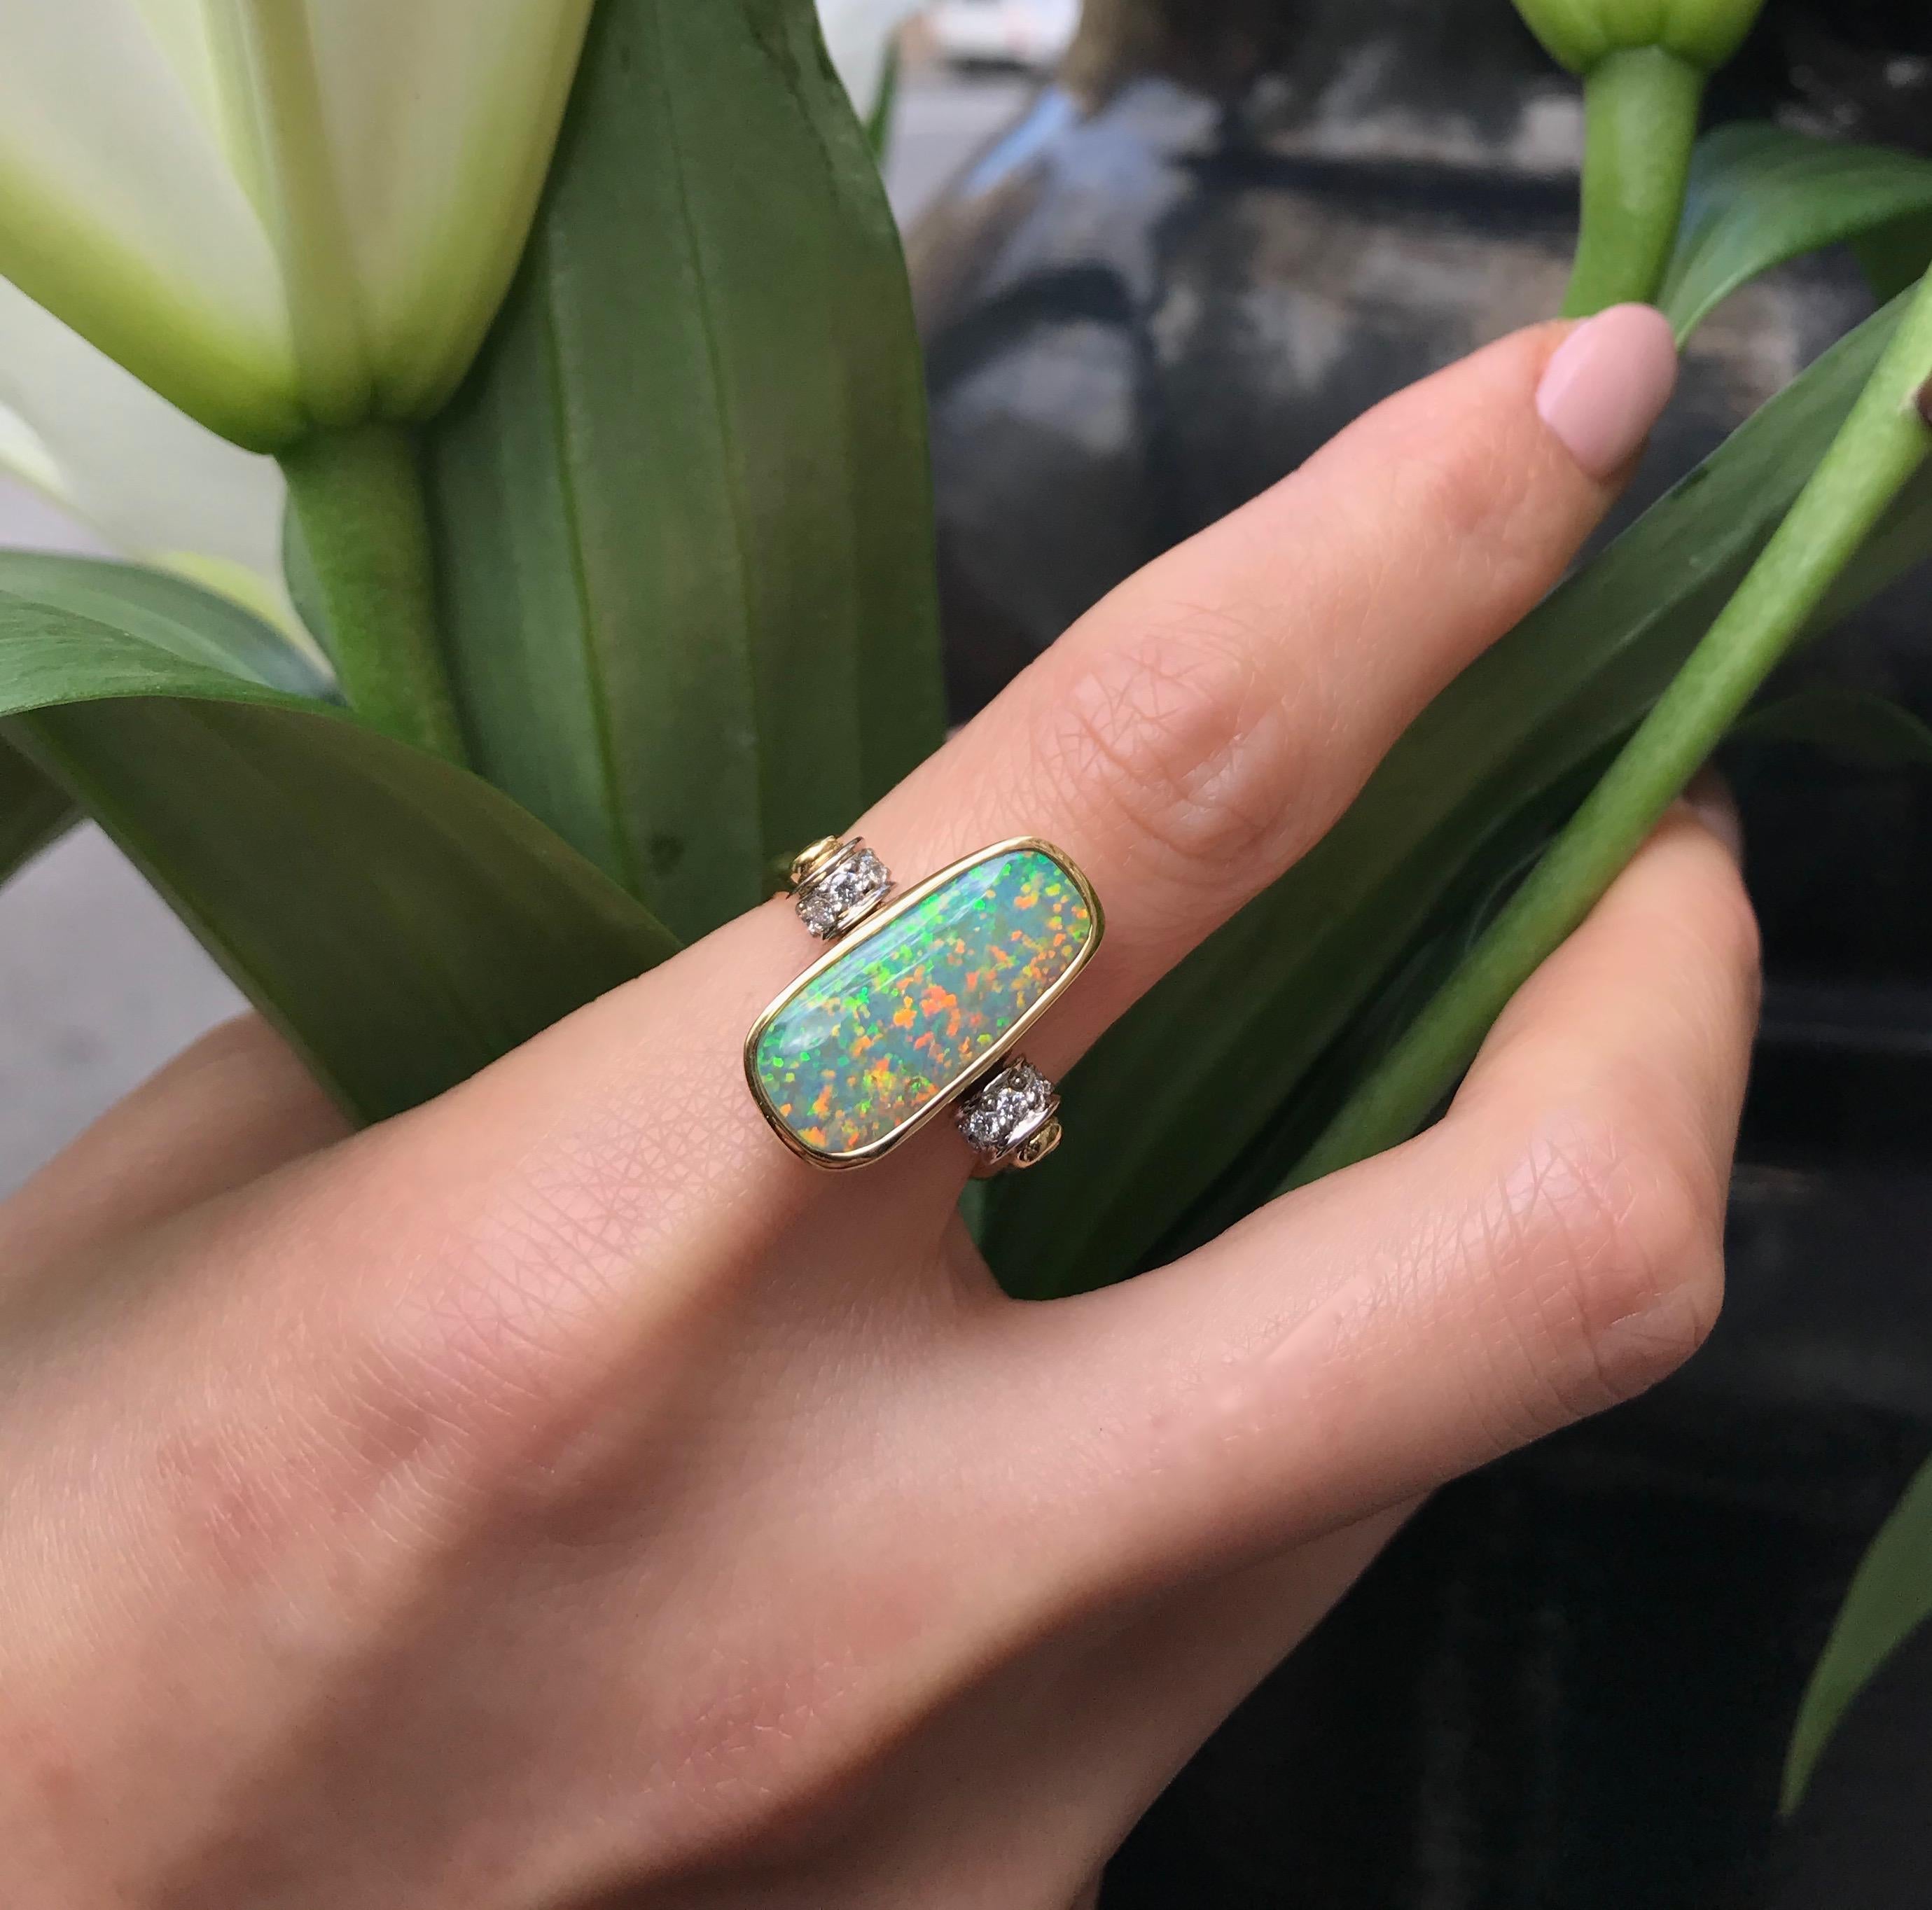 Versatile and very clever “Così Fan Tutte” is both a ring and a pendant. A flawless boulder-pipe opal (6.6ct) from our own mines in Queensland is shown off to advantage by its unusual 18K yellow gold setting. A flick of the two white gold